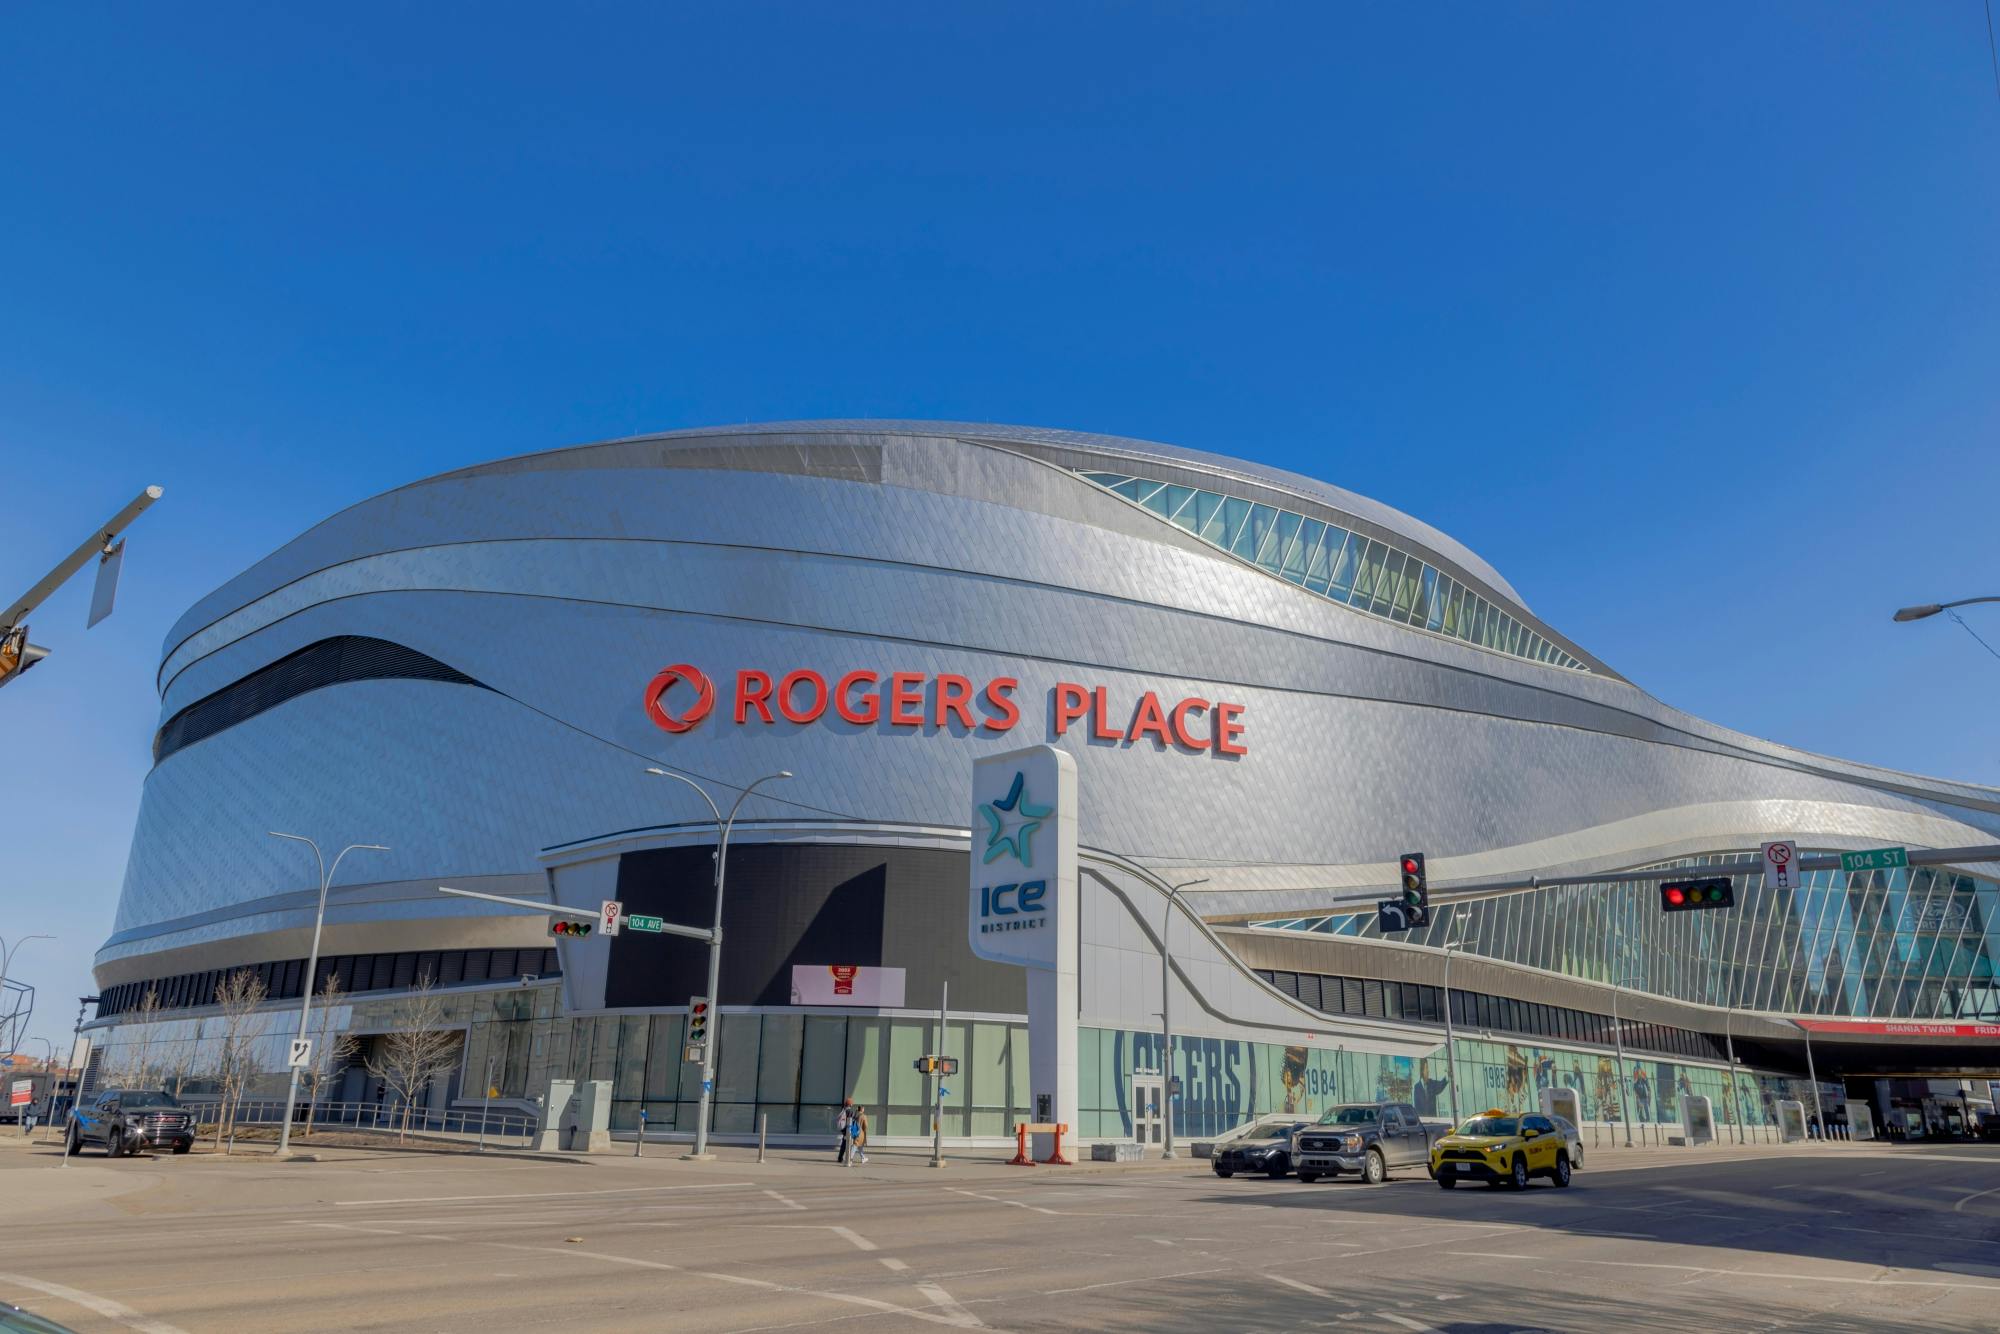 Edmonton Oilers Ice Hockey Game Ticket at Rogers Place